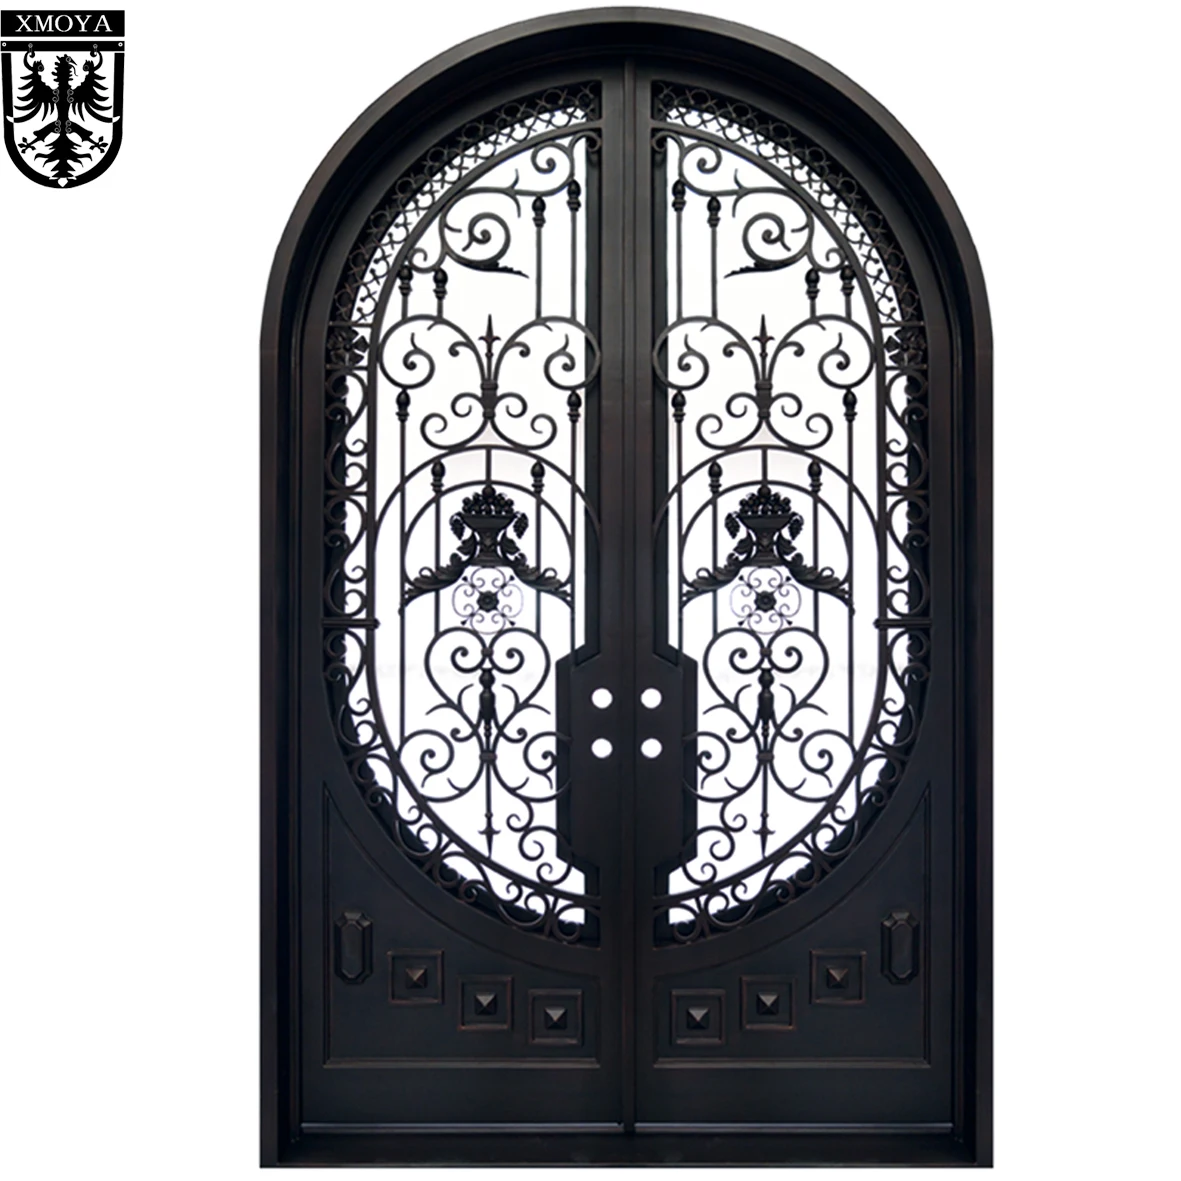 Lobby house front safety entrance doors design